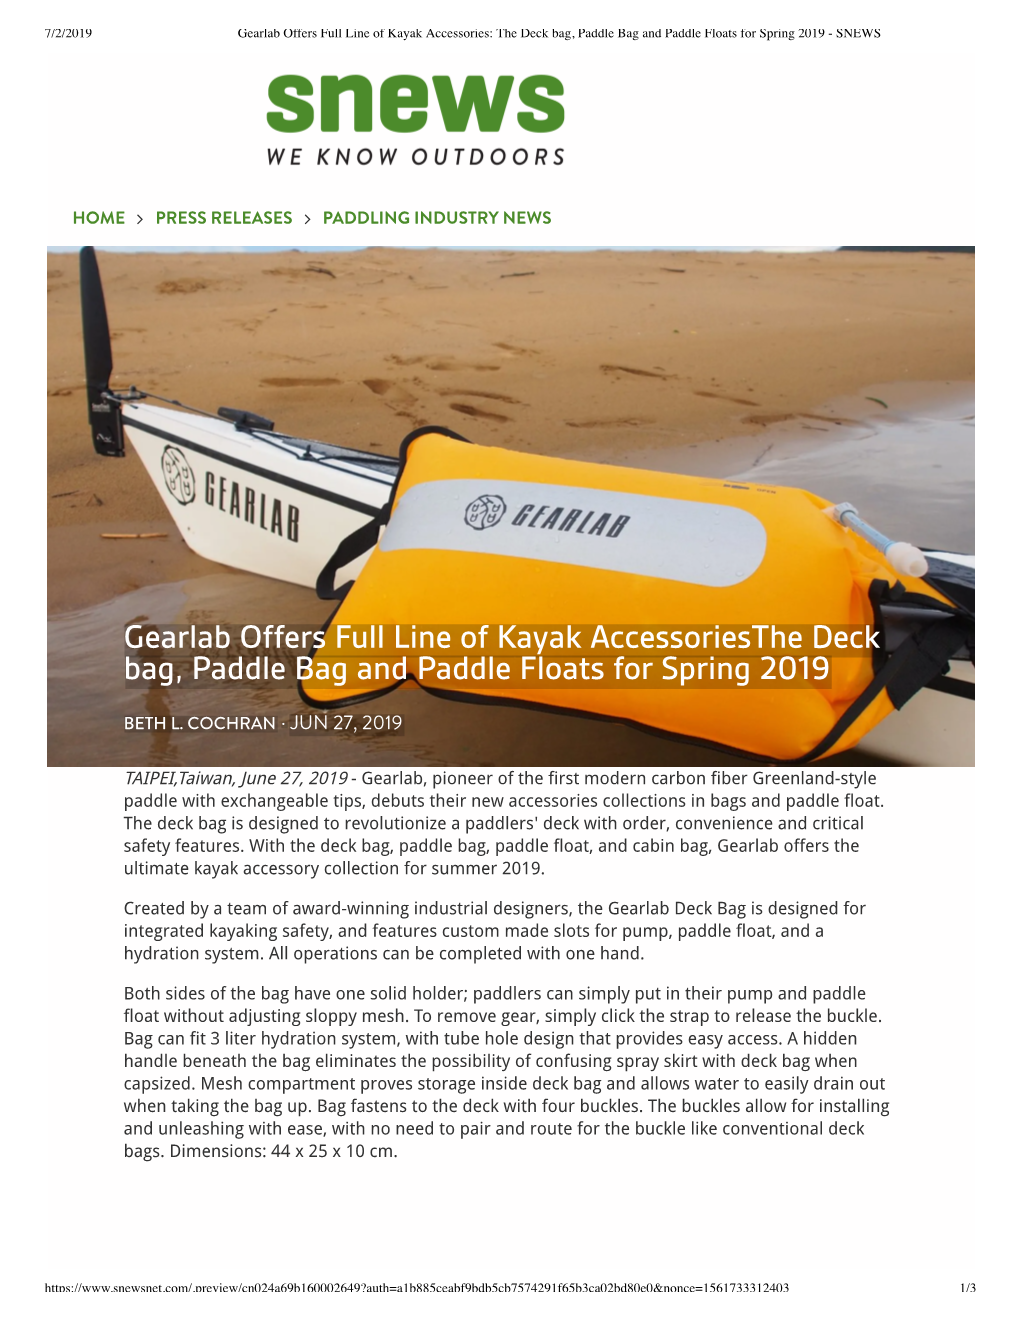 Gearlab Offers Full Line of Kayak Acces... Paddle Floats for Spring